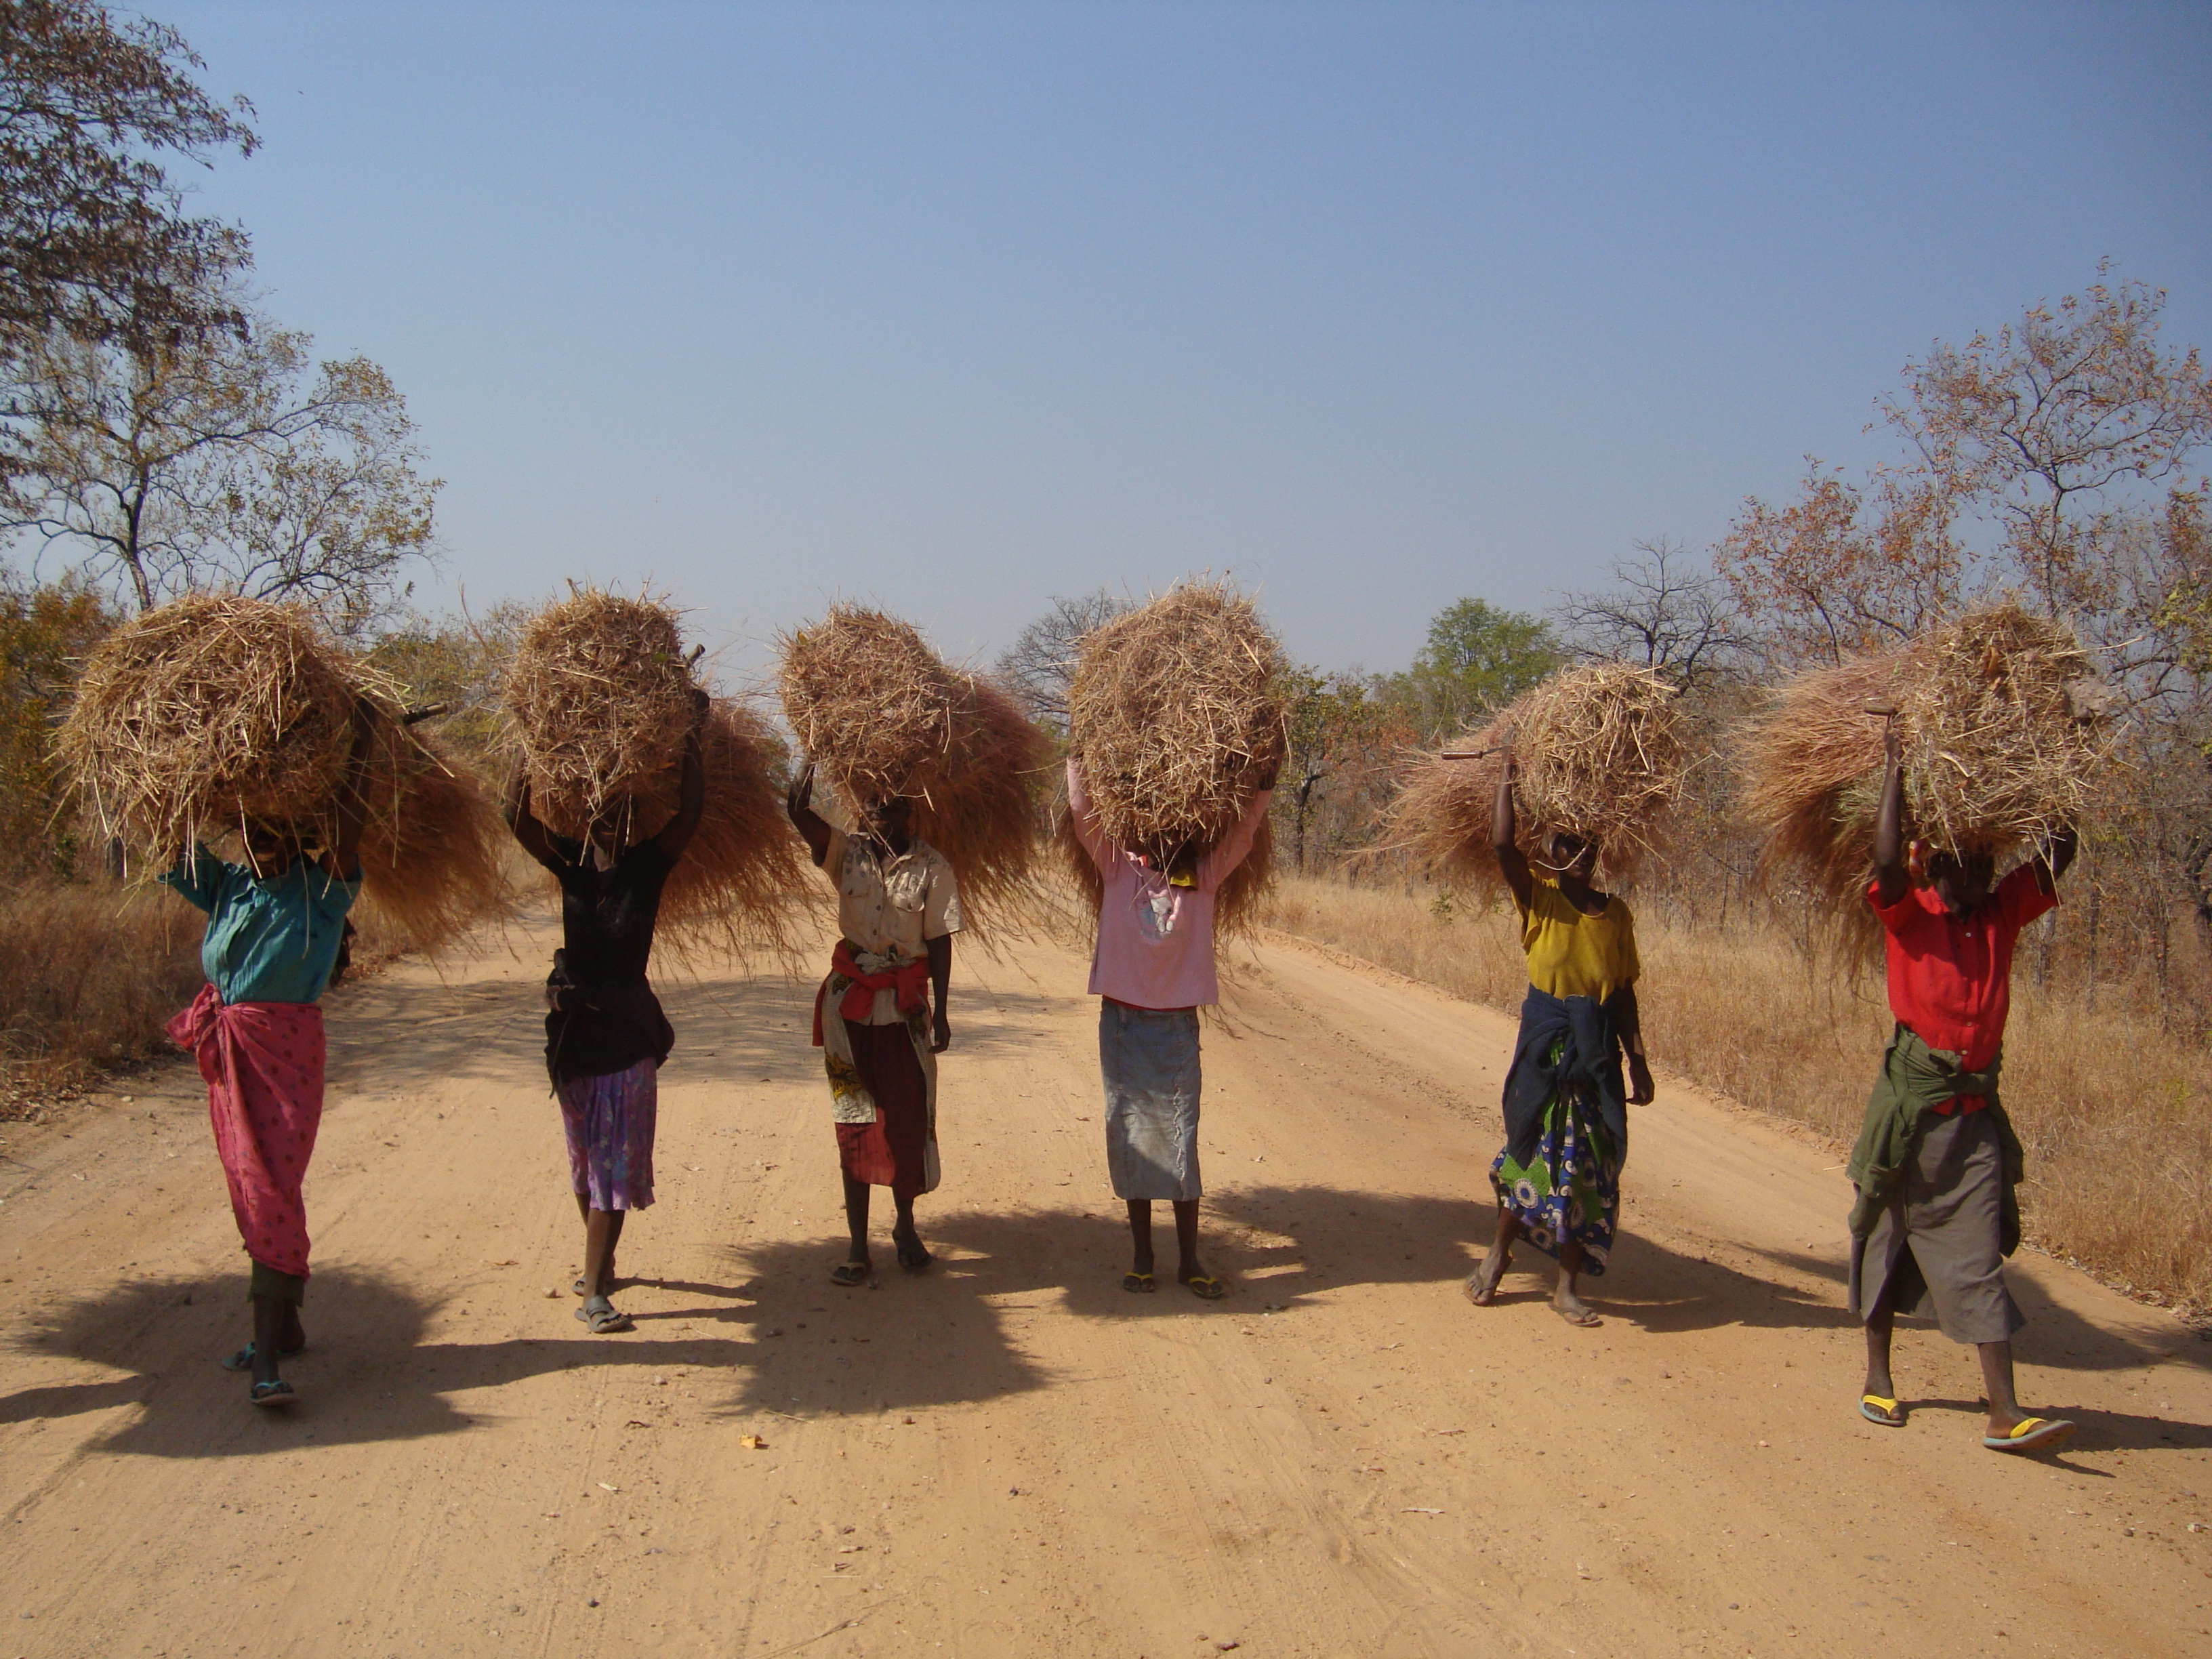 On the road to work, Africa ladies carrying hay above their heads down a dusty African road